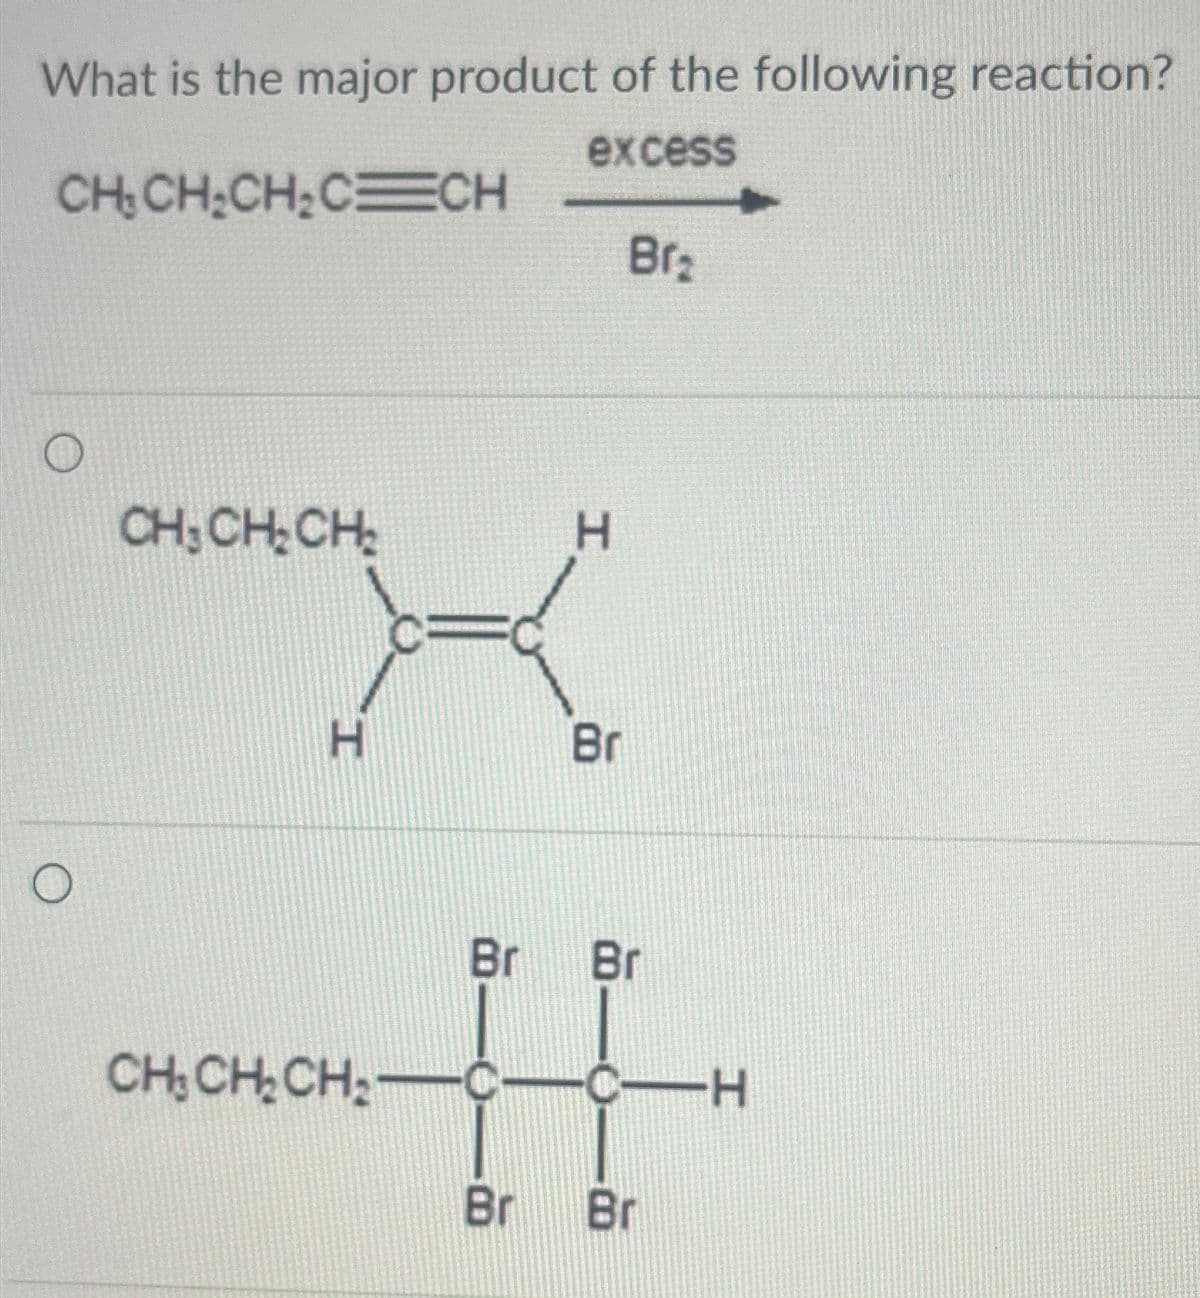 What is the major product of the following reaction?
excess
CH₂CH₂CH₂CCH
O
O
CH₂ CH₂ CH₂
H
H
Br
Br₂
Br Br
CH₂CH₂CH₂C C-H
Br Br